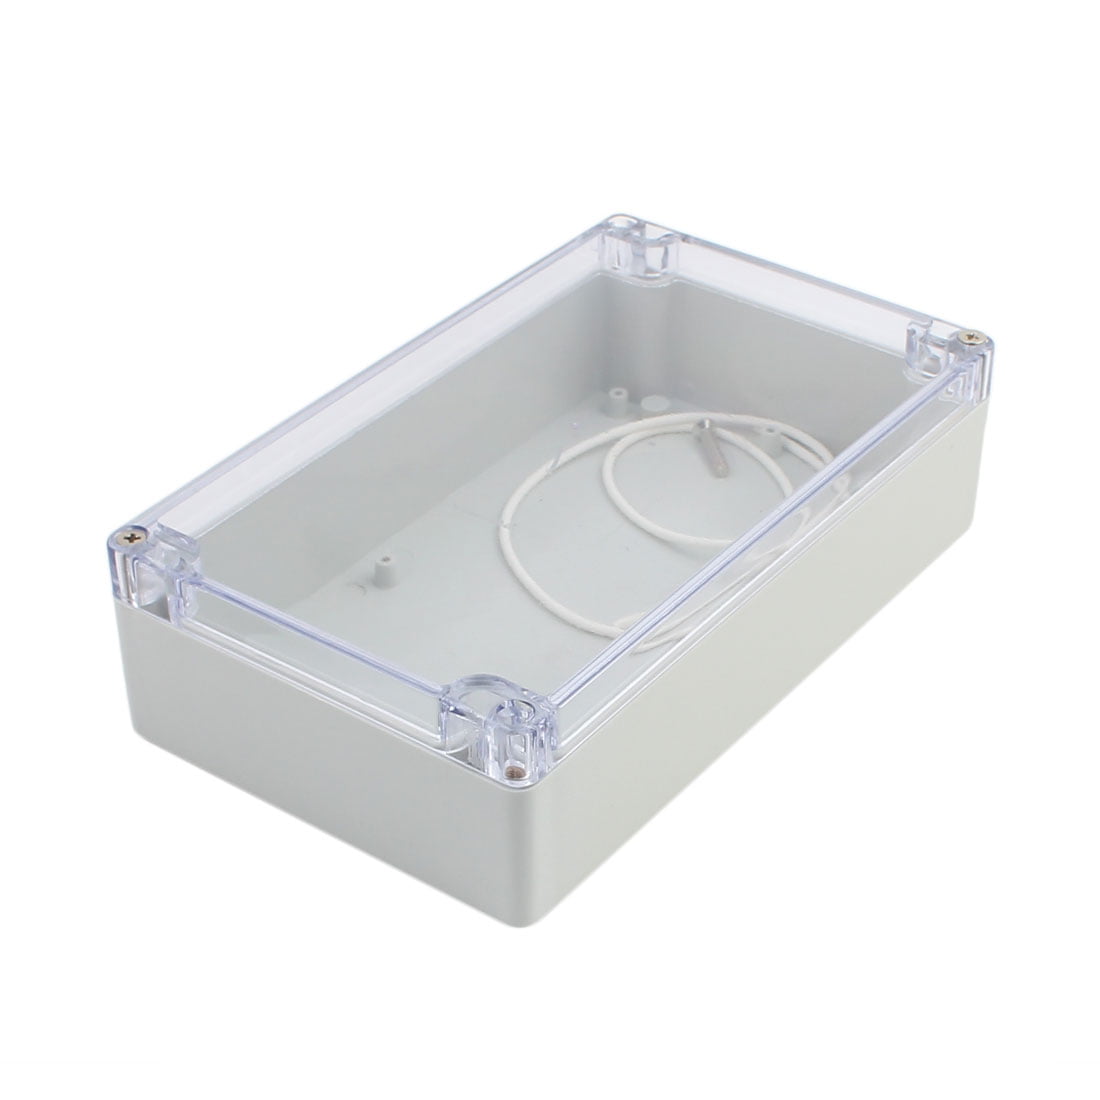 115x90x55 Waterproof Clear Cover Electronic Cable Project Box Enclosure CaRSXUI 